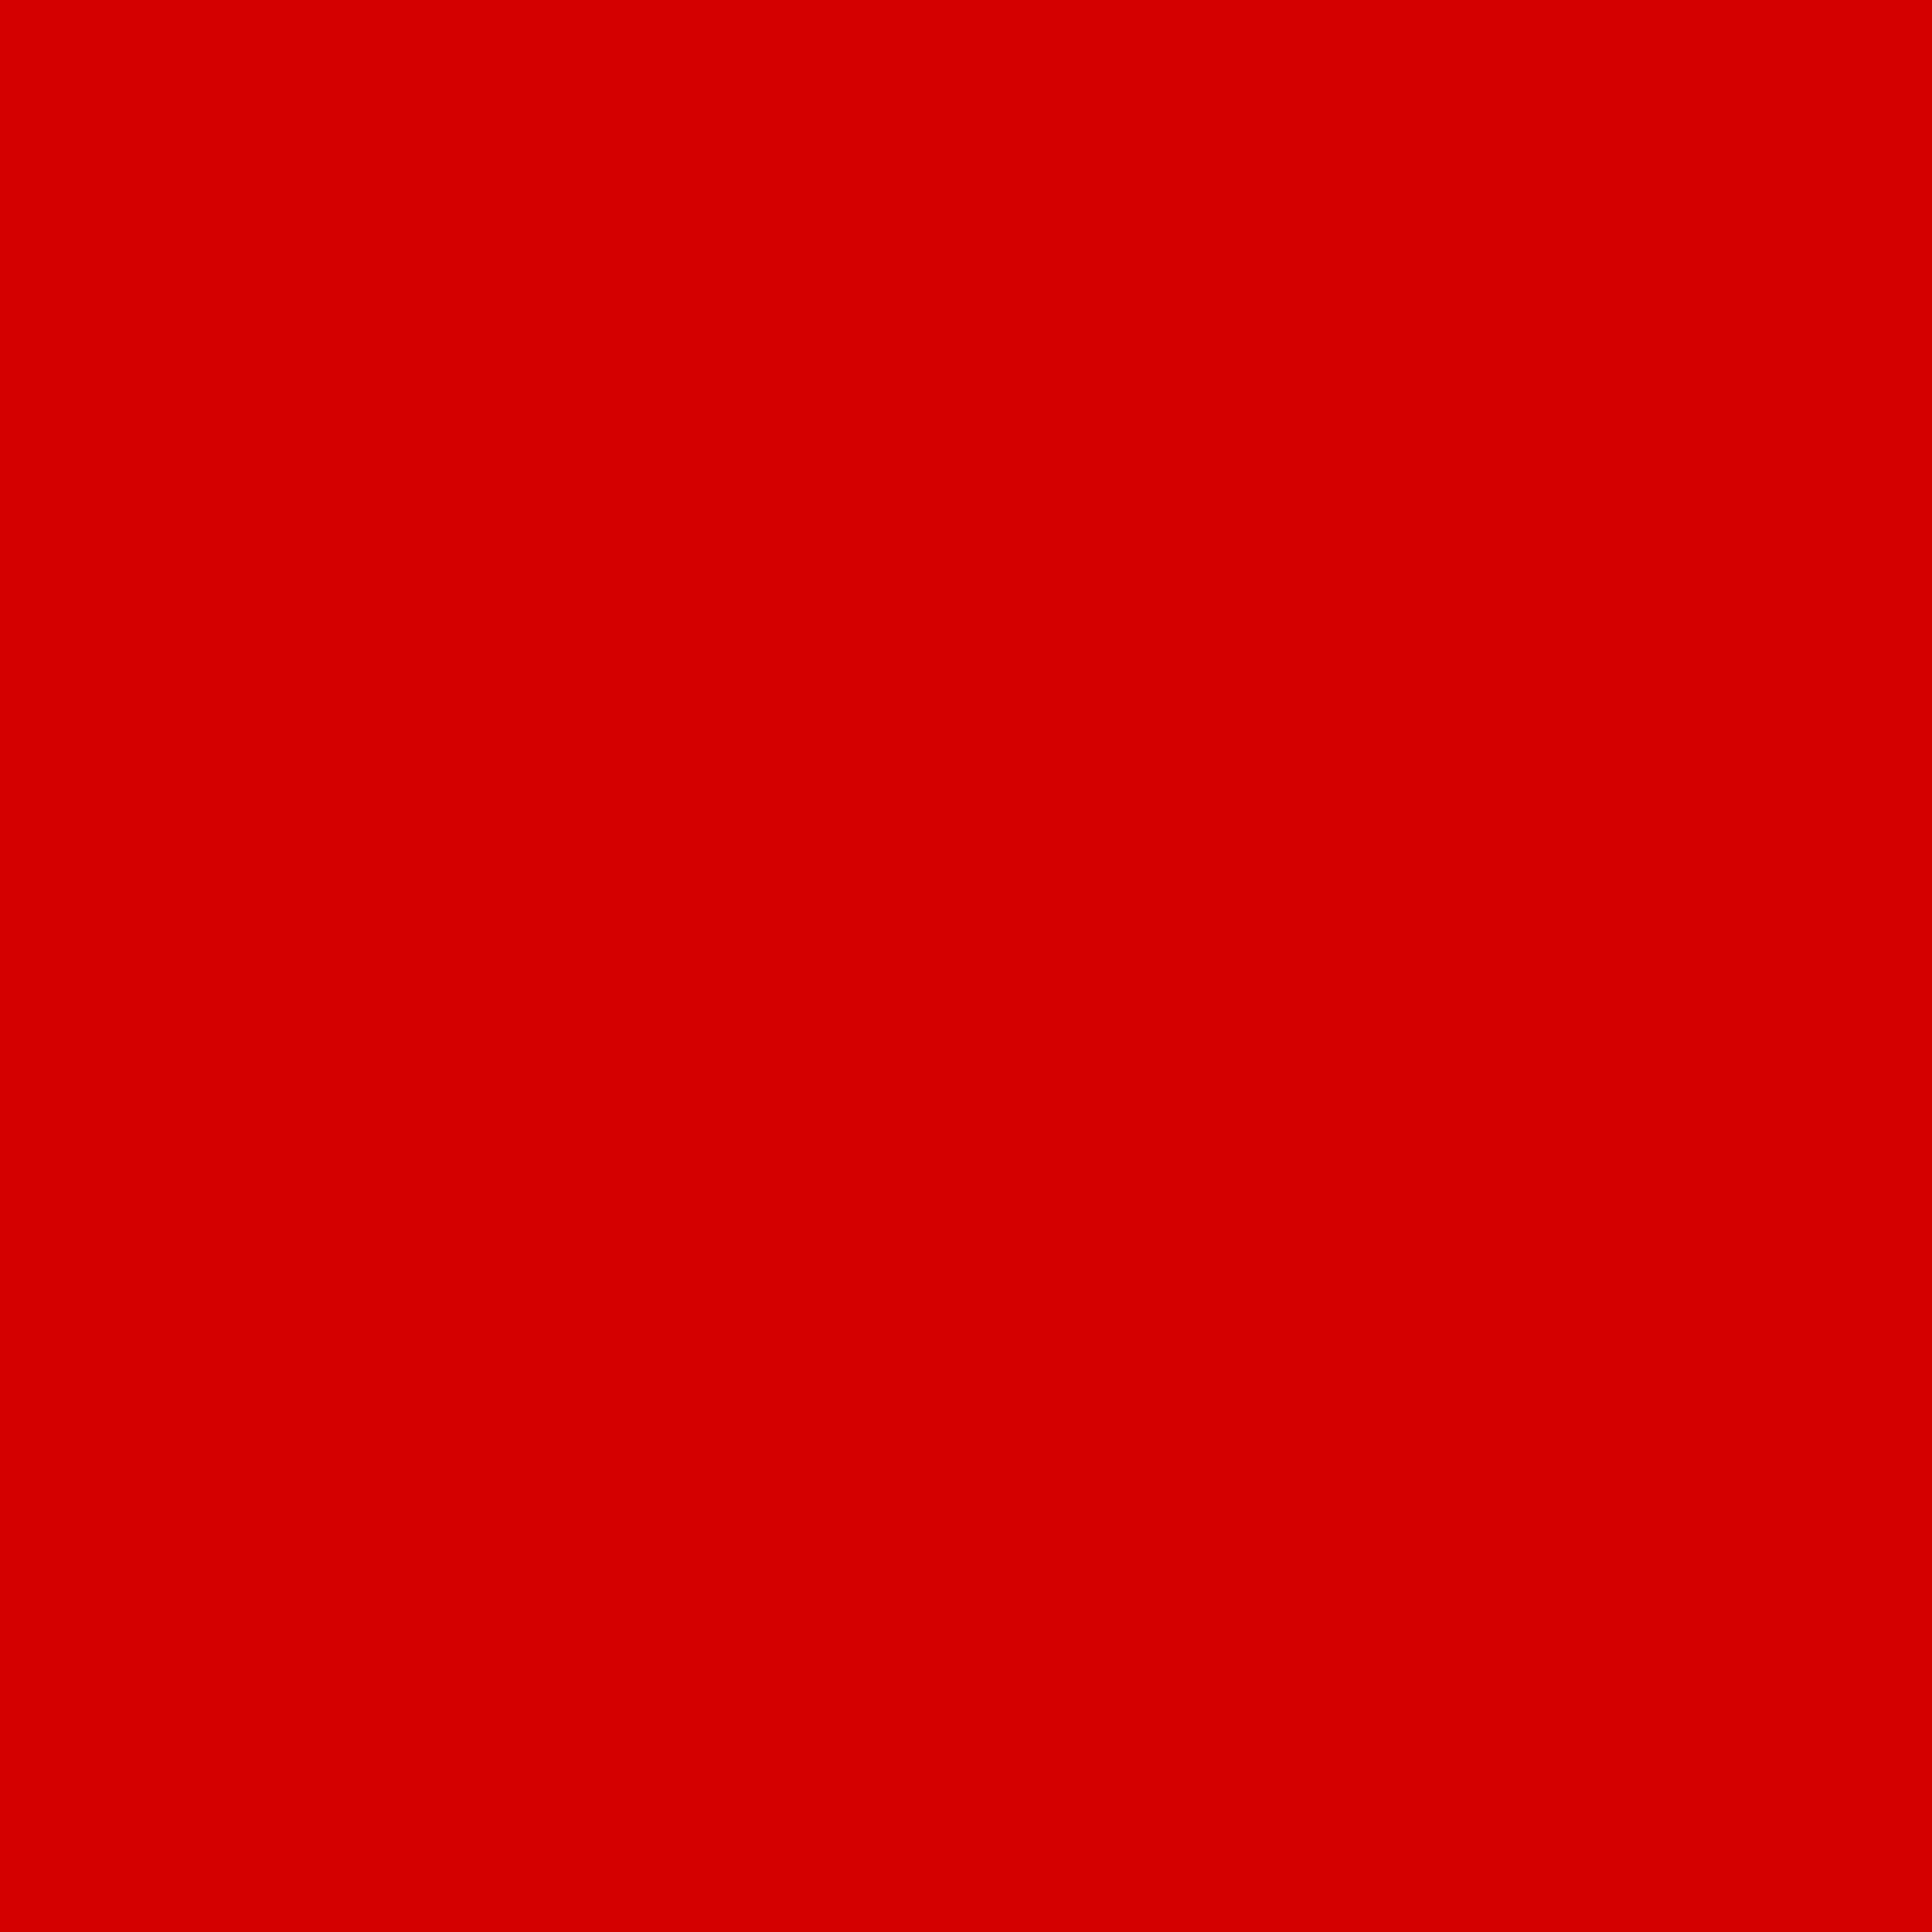 3600x3600 Rosso Corsa Solid Color Background